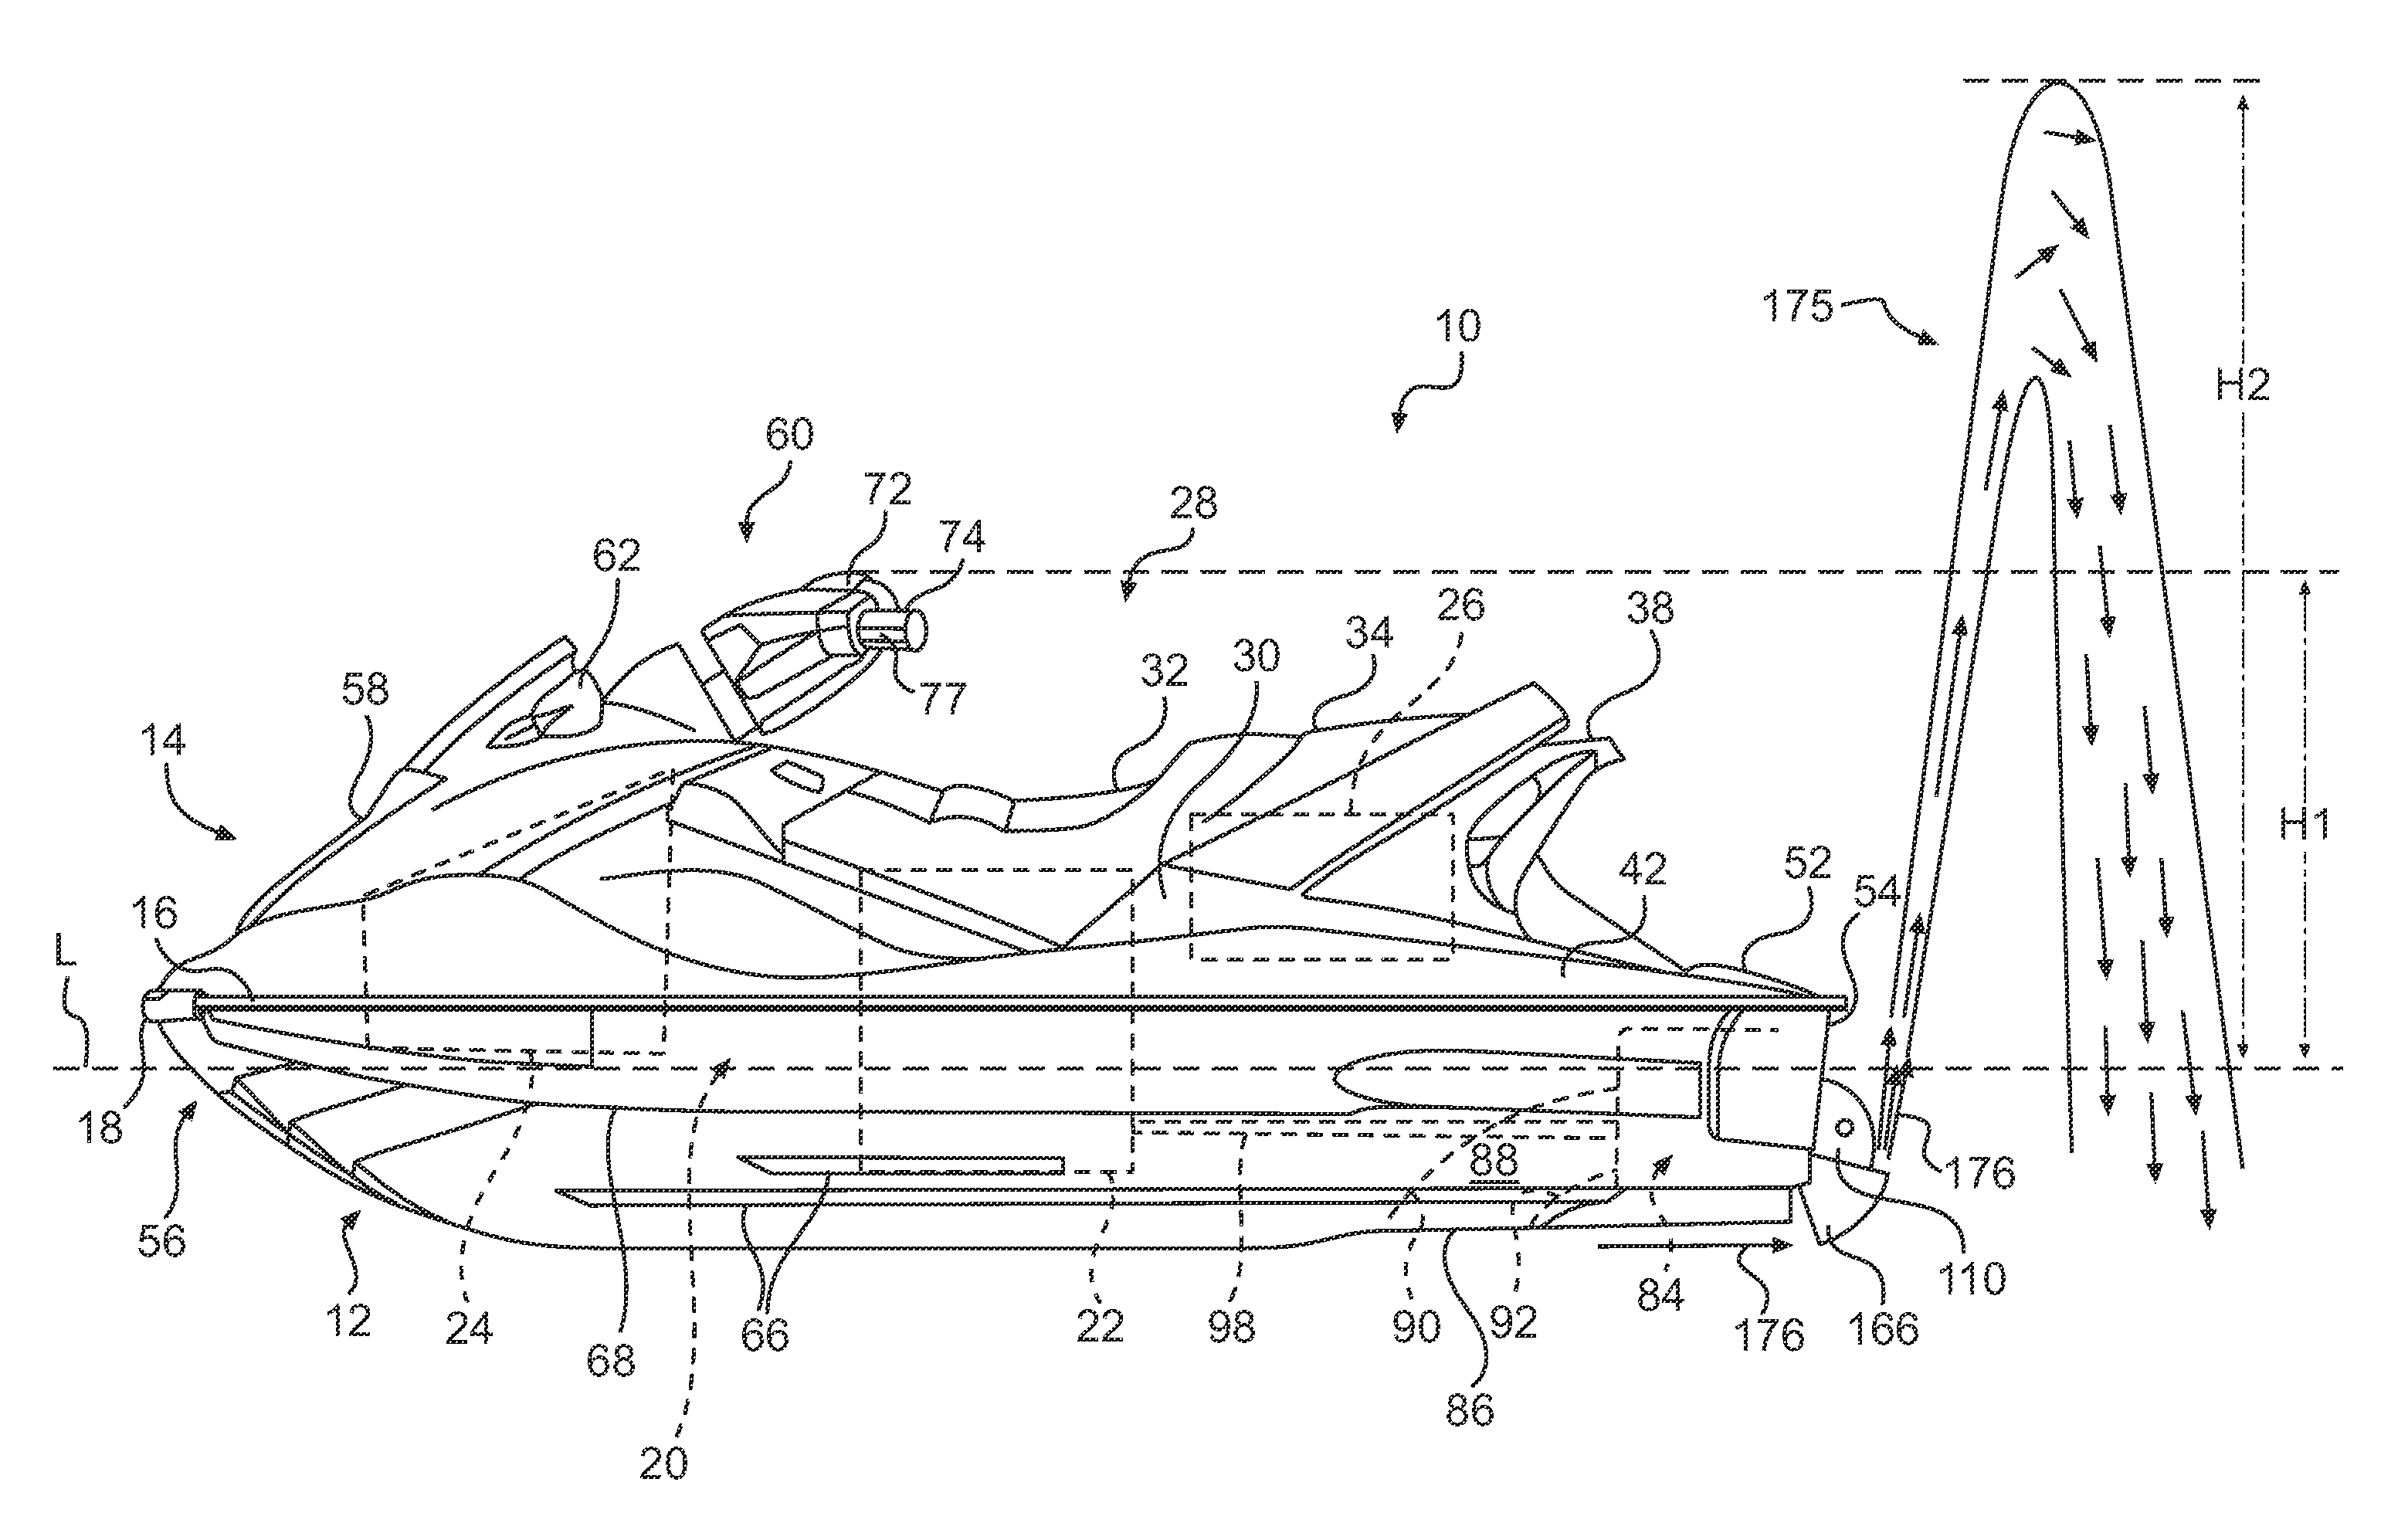 Method of indicating a deceleration of a watercraft